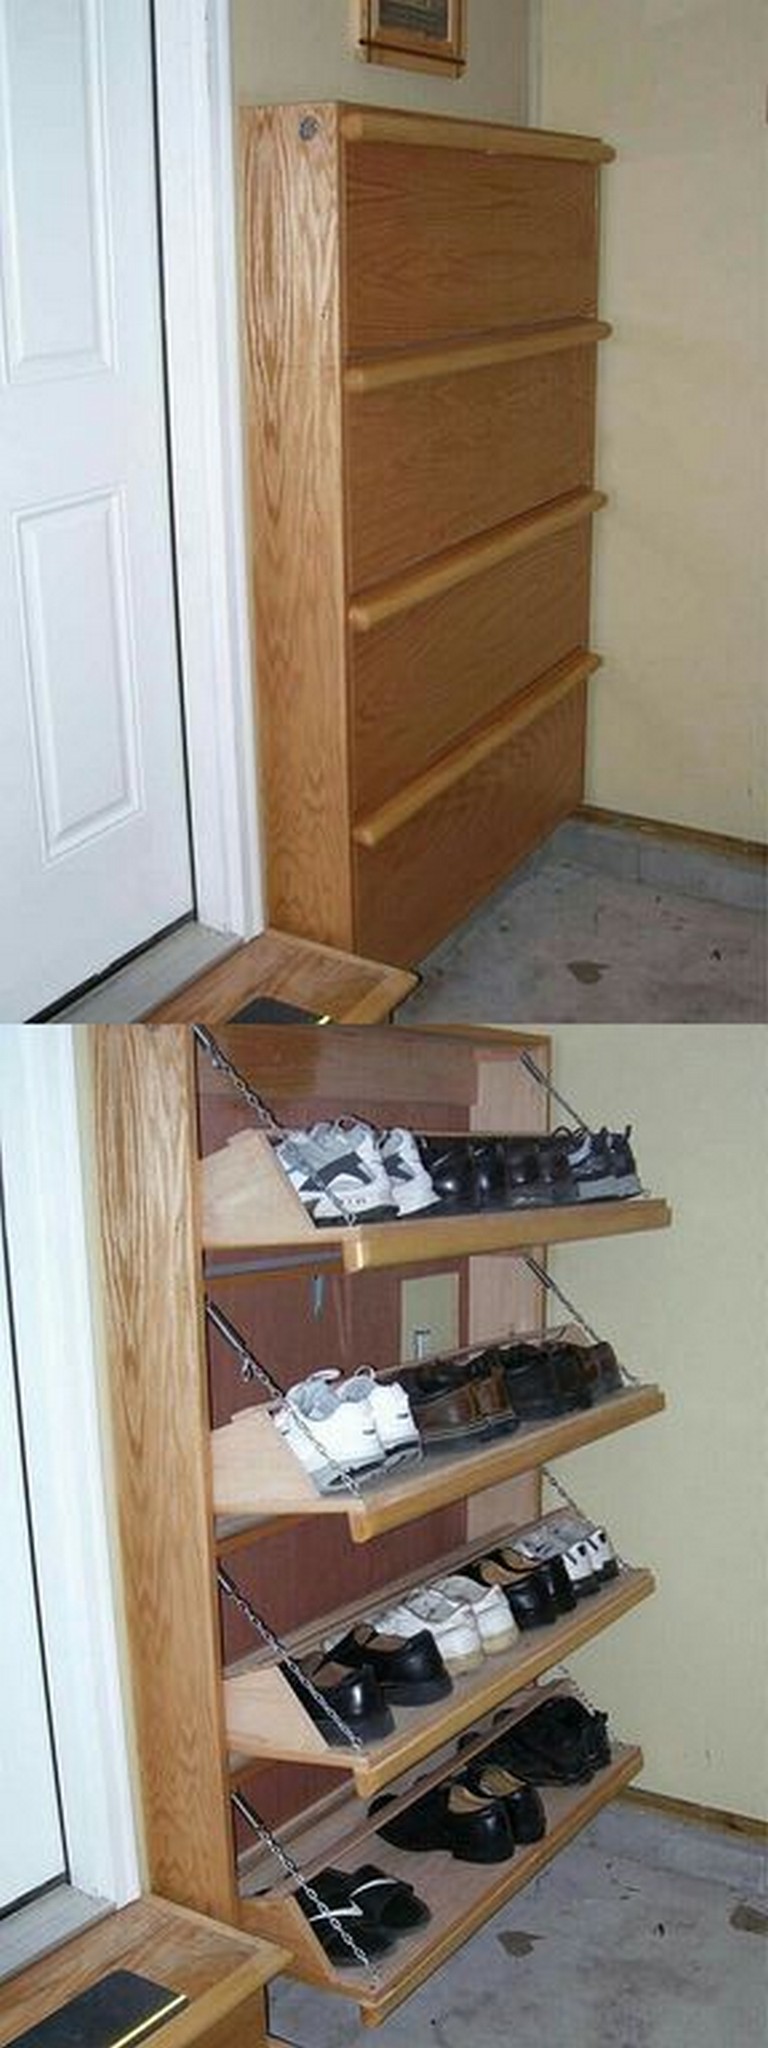 25 Simple Wall Shoes Rack Ideas You Can Make Yourshelf